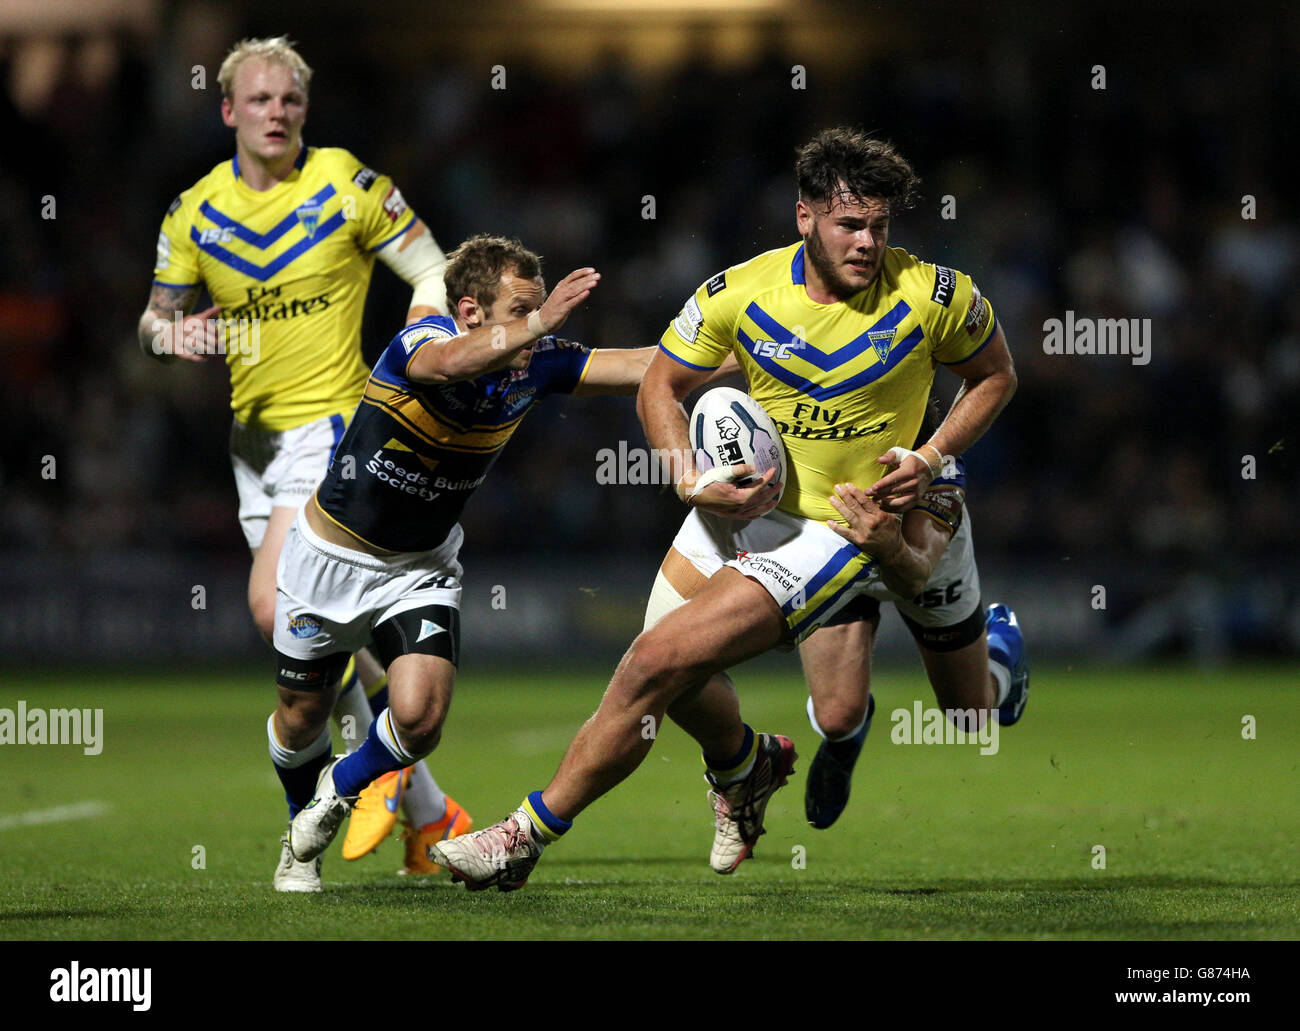 Warrington Wolves' Joe Philbin (right) is tackled by Leeds Rhino's Rob Burrow (left) during the First Utility Super League, Super 8s match at Headingley Carnegie, Leeds. Stock Photo